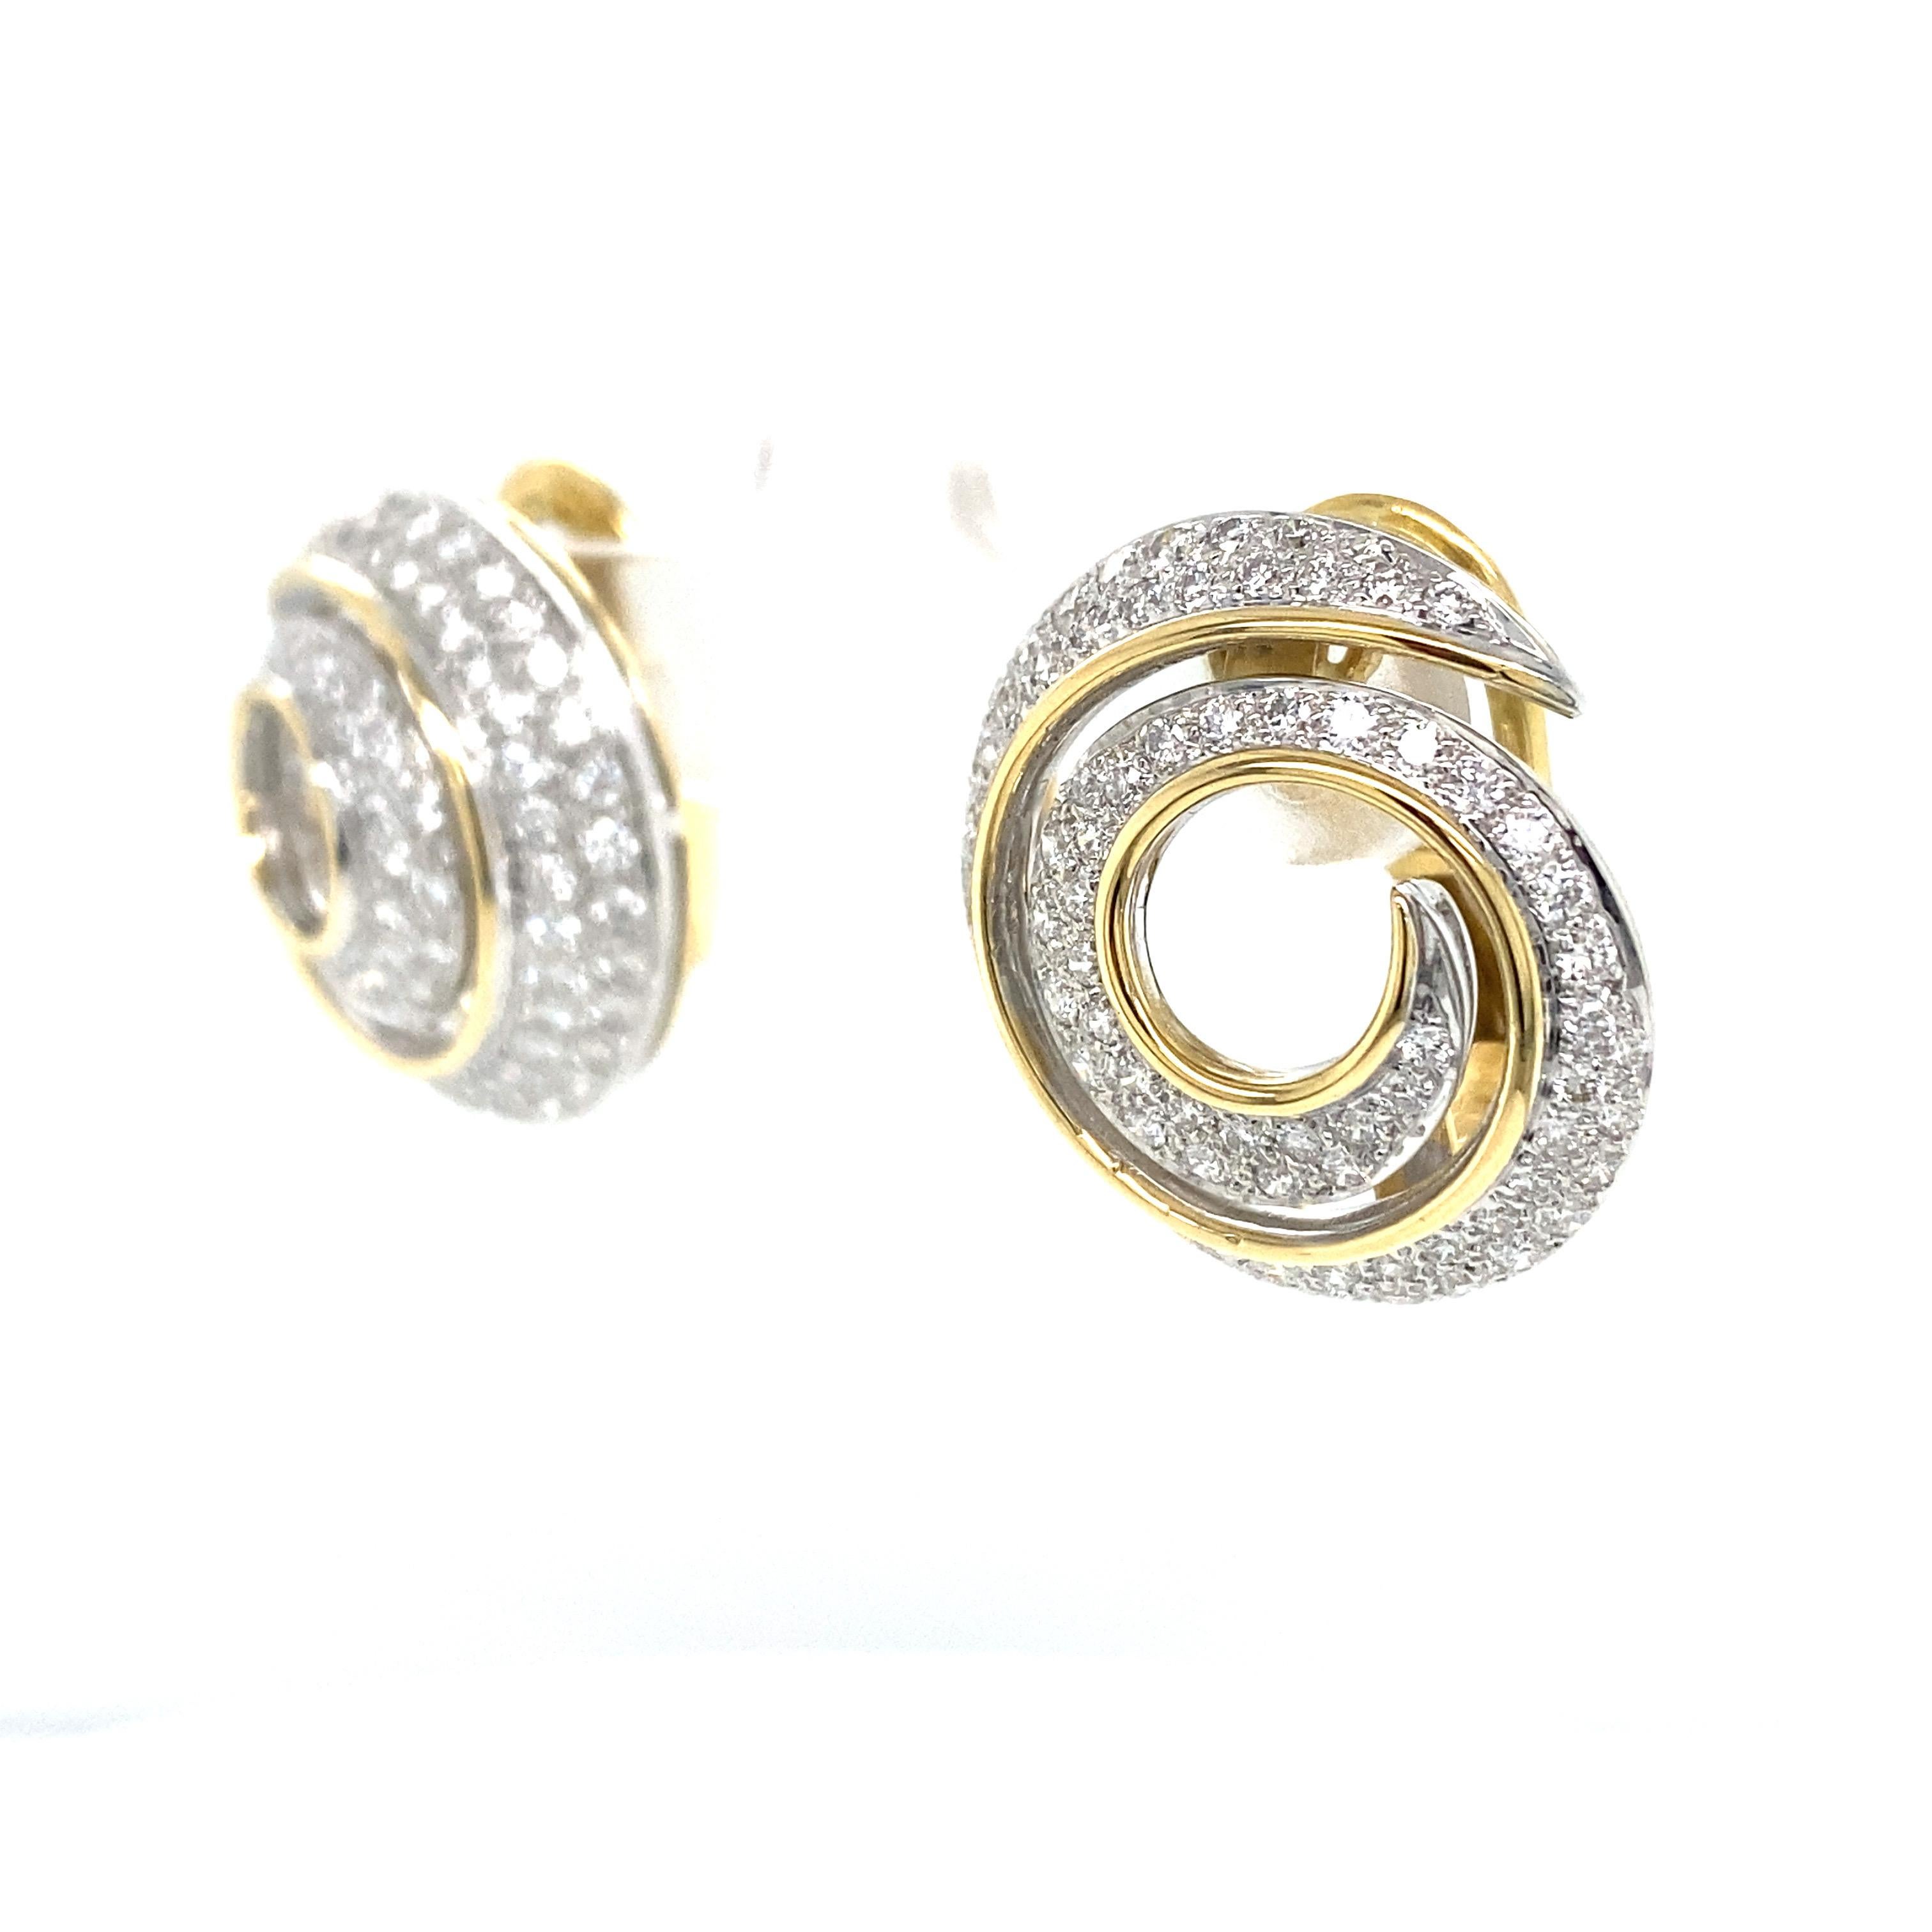 18k Yellow Gold and Platinum Handmade Diamond Swirl Button Earrings In Excellent Condition For Sale In Boca Raton, FL